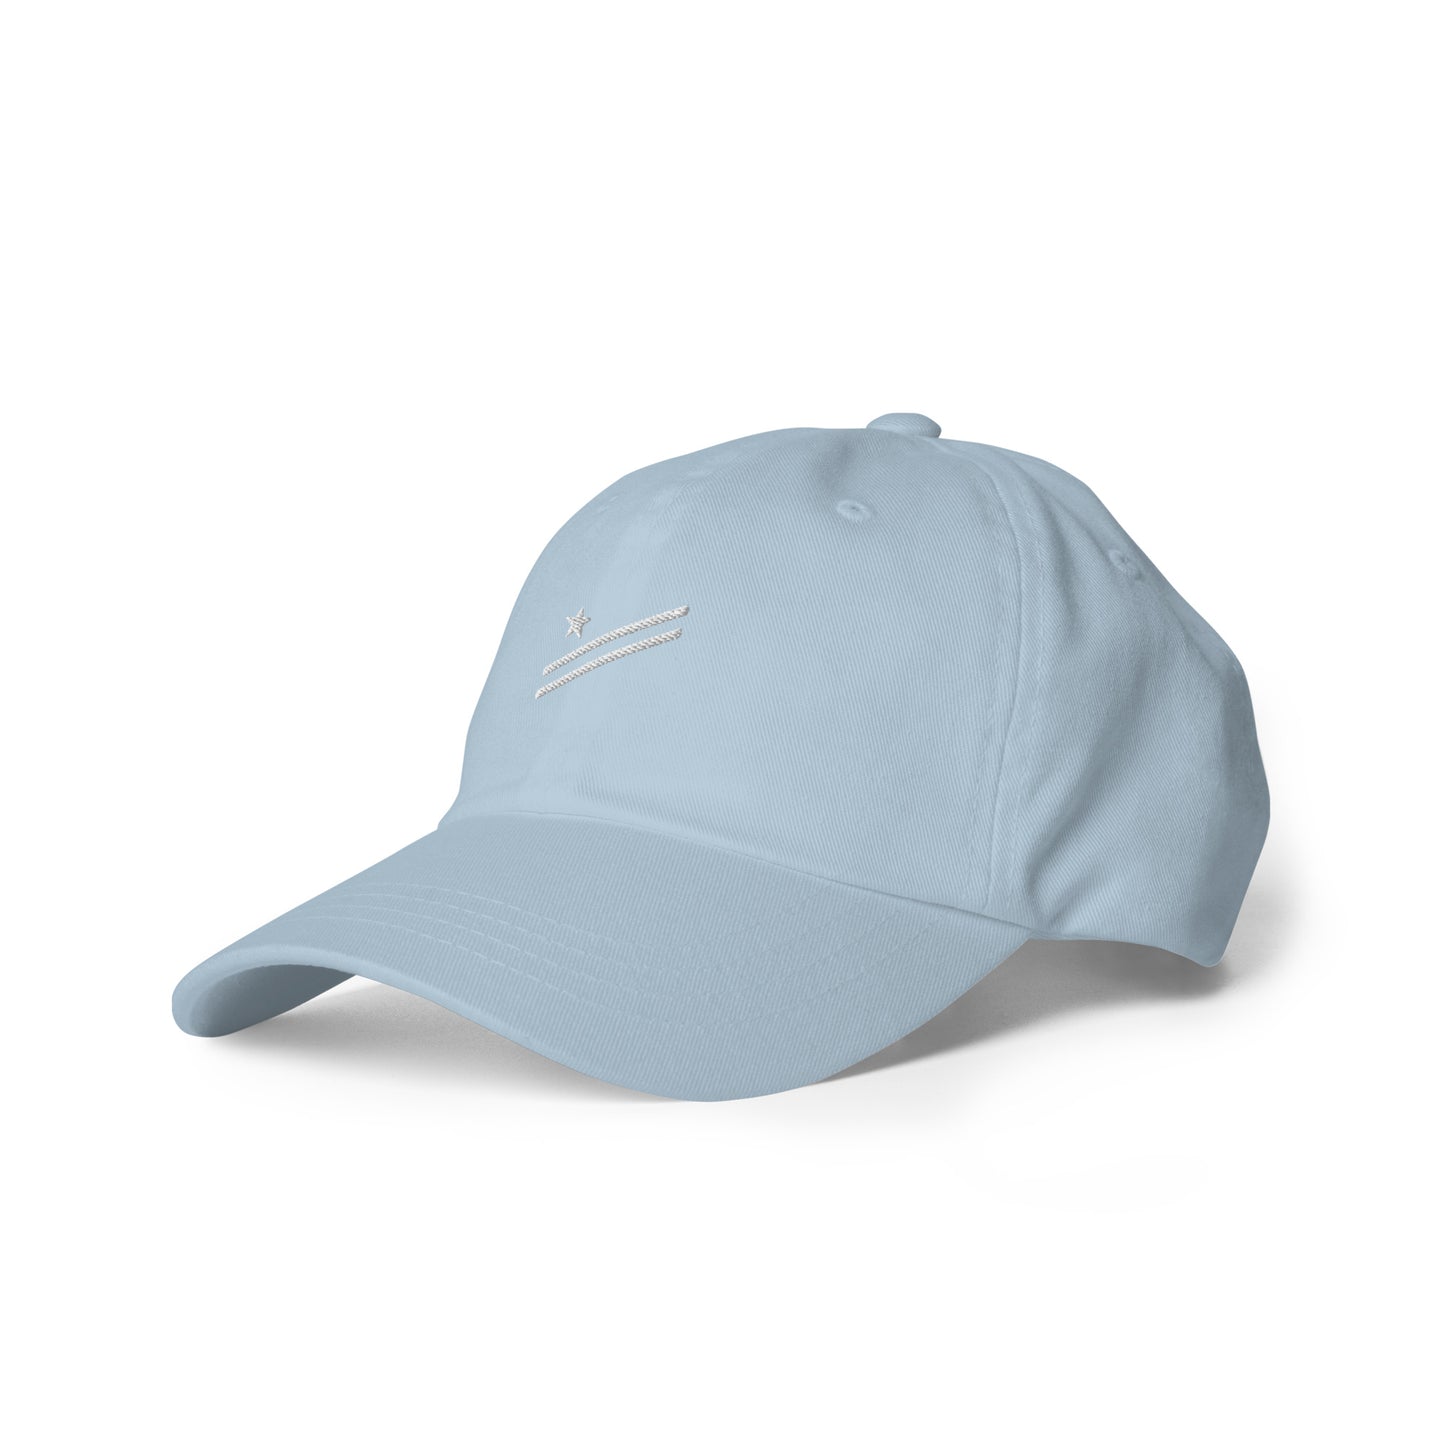 Martyrs - Classic Dad hat - WHITE FLAG broderie